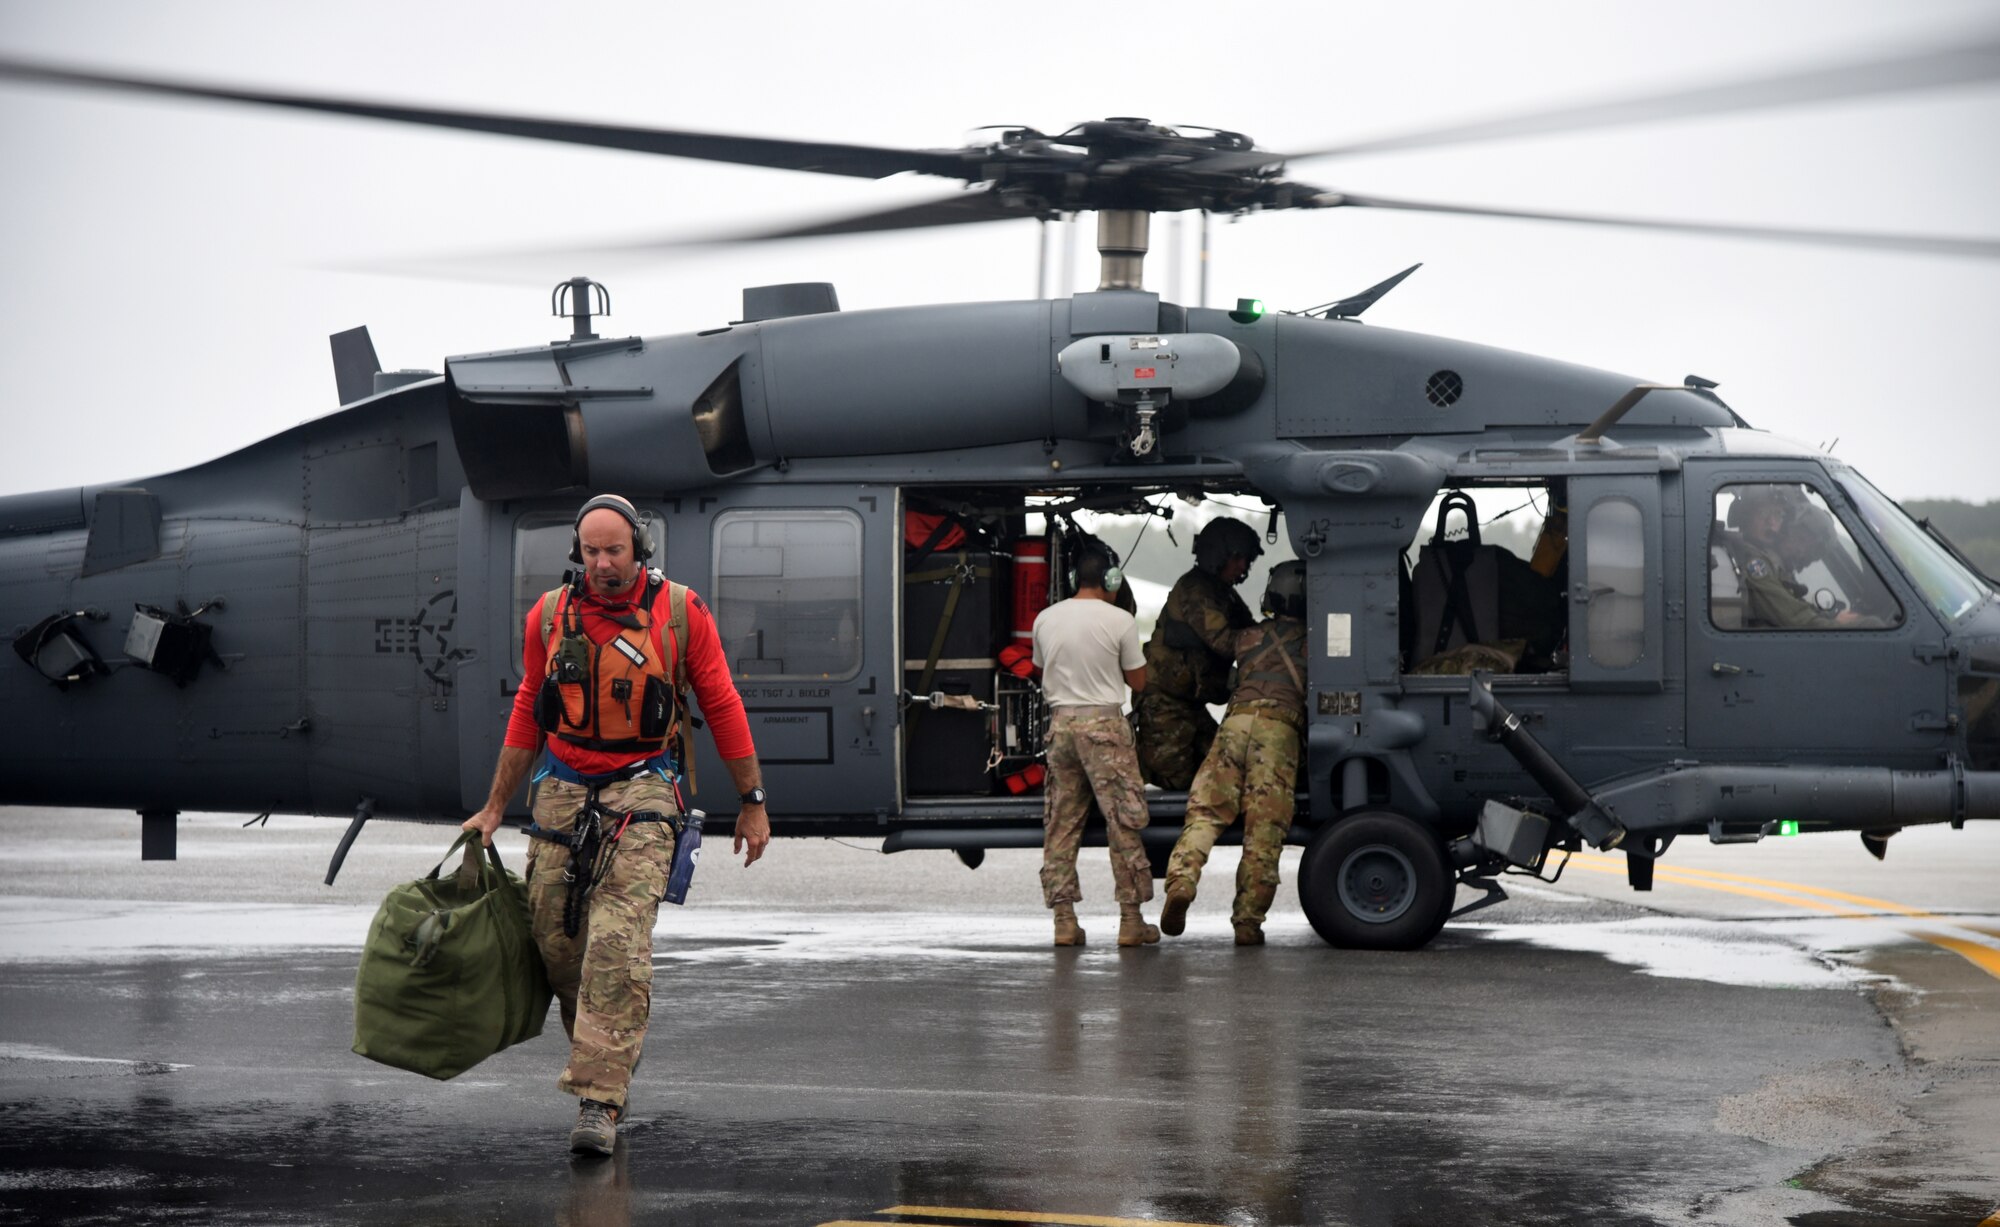 Senior Master Sgt. Wes Hufnagel, a pararescueman, departs on an HH-60 Pave Hawk helicopter at Joint Base Charleston, S.C., Sept. 15, 2018. Airmen and equipment from the 334th Air Expeditionary Group arrived at Joint Base Charleston, S.C. aboard HC-130J Combat King II aircraft and HH-60G Pave Hawks from Moody Air Force Base, Georgia. The 344th AEG is being pre-positioned to be ready to provide search-and-rescue relief in the wake of Hurricane Florence. The 334th AEG is an expeditionary search-and-rescue unit comprised of 23d Wing (Moody AFB, Ga.) and 920th Rescue Wing (Patrick AFB, Florid) personnel and assets ready to perform surface, fixed- wing and rotary SAR operations when needed. (U.S. Air Force Photo by Technical Sgt. Kelly Goonan)